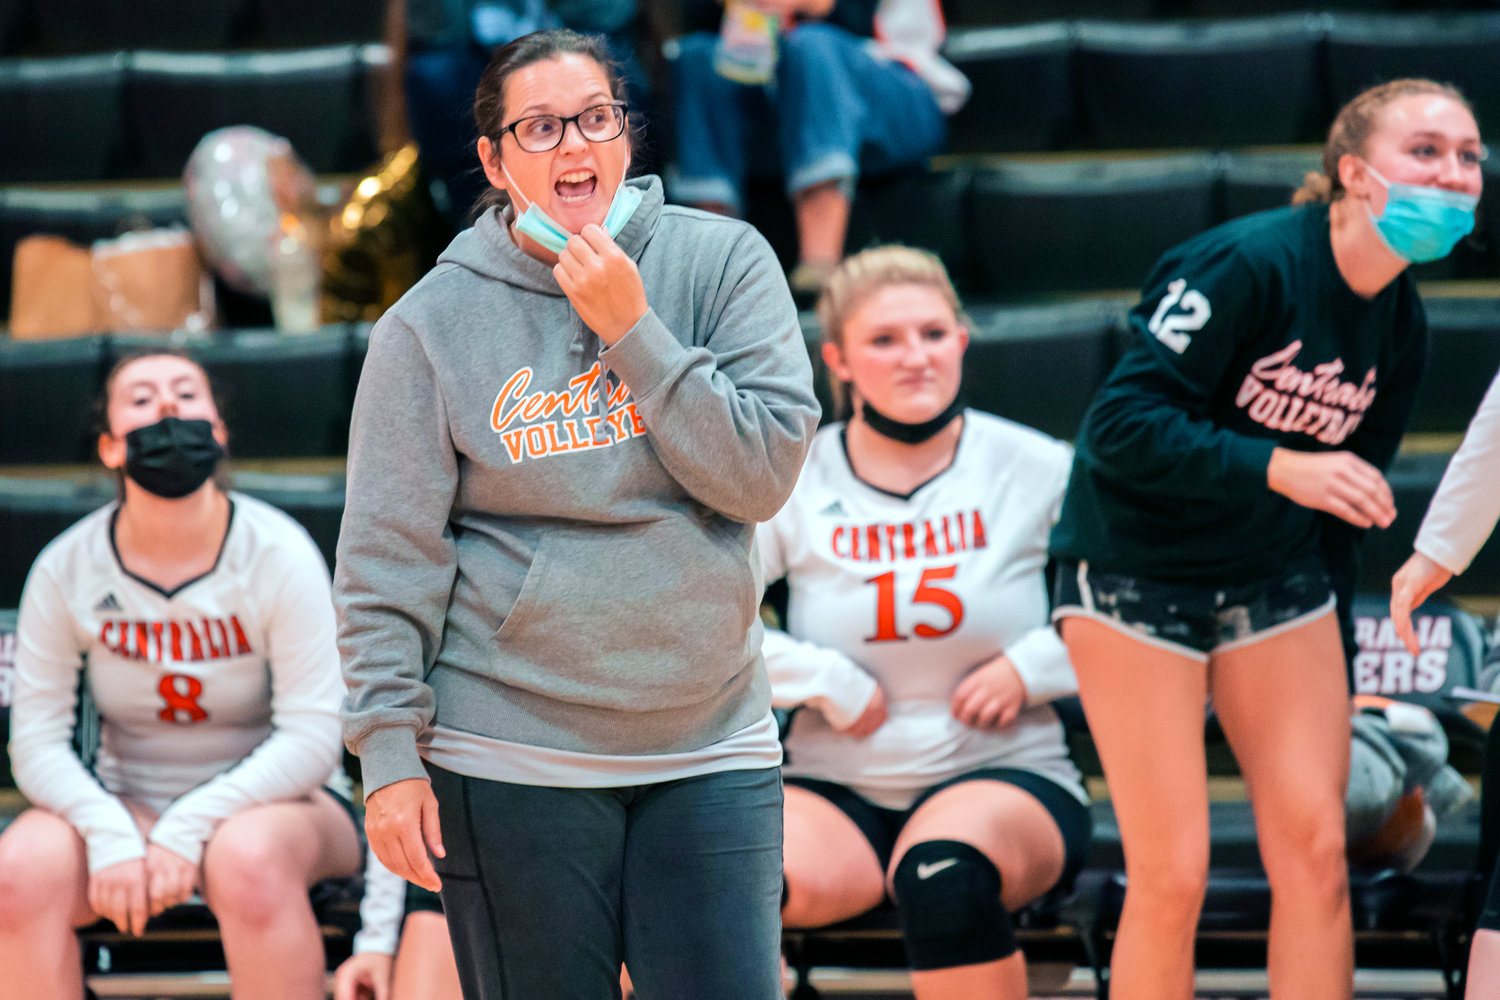 Centralia Volleyball Coach Marti Smith yells to athletes on the court during a match against Tumwater Tuesday night.